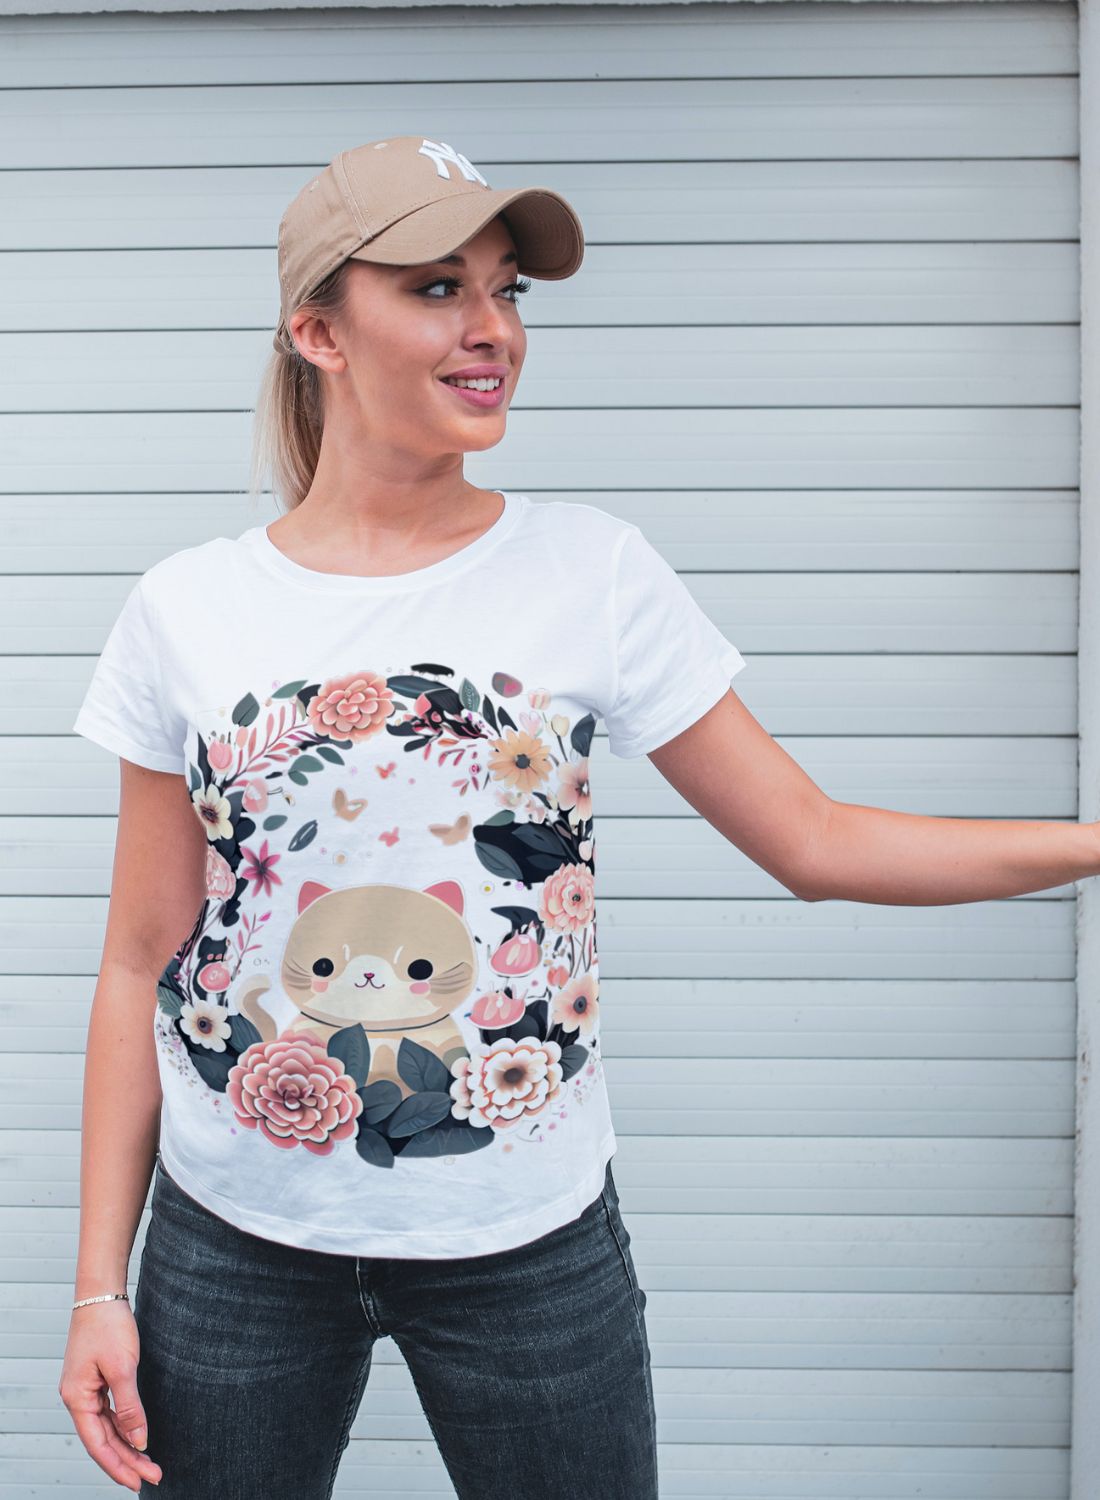 Woman wearing a t - shirt with a bear on it.